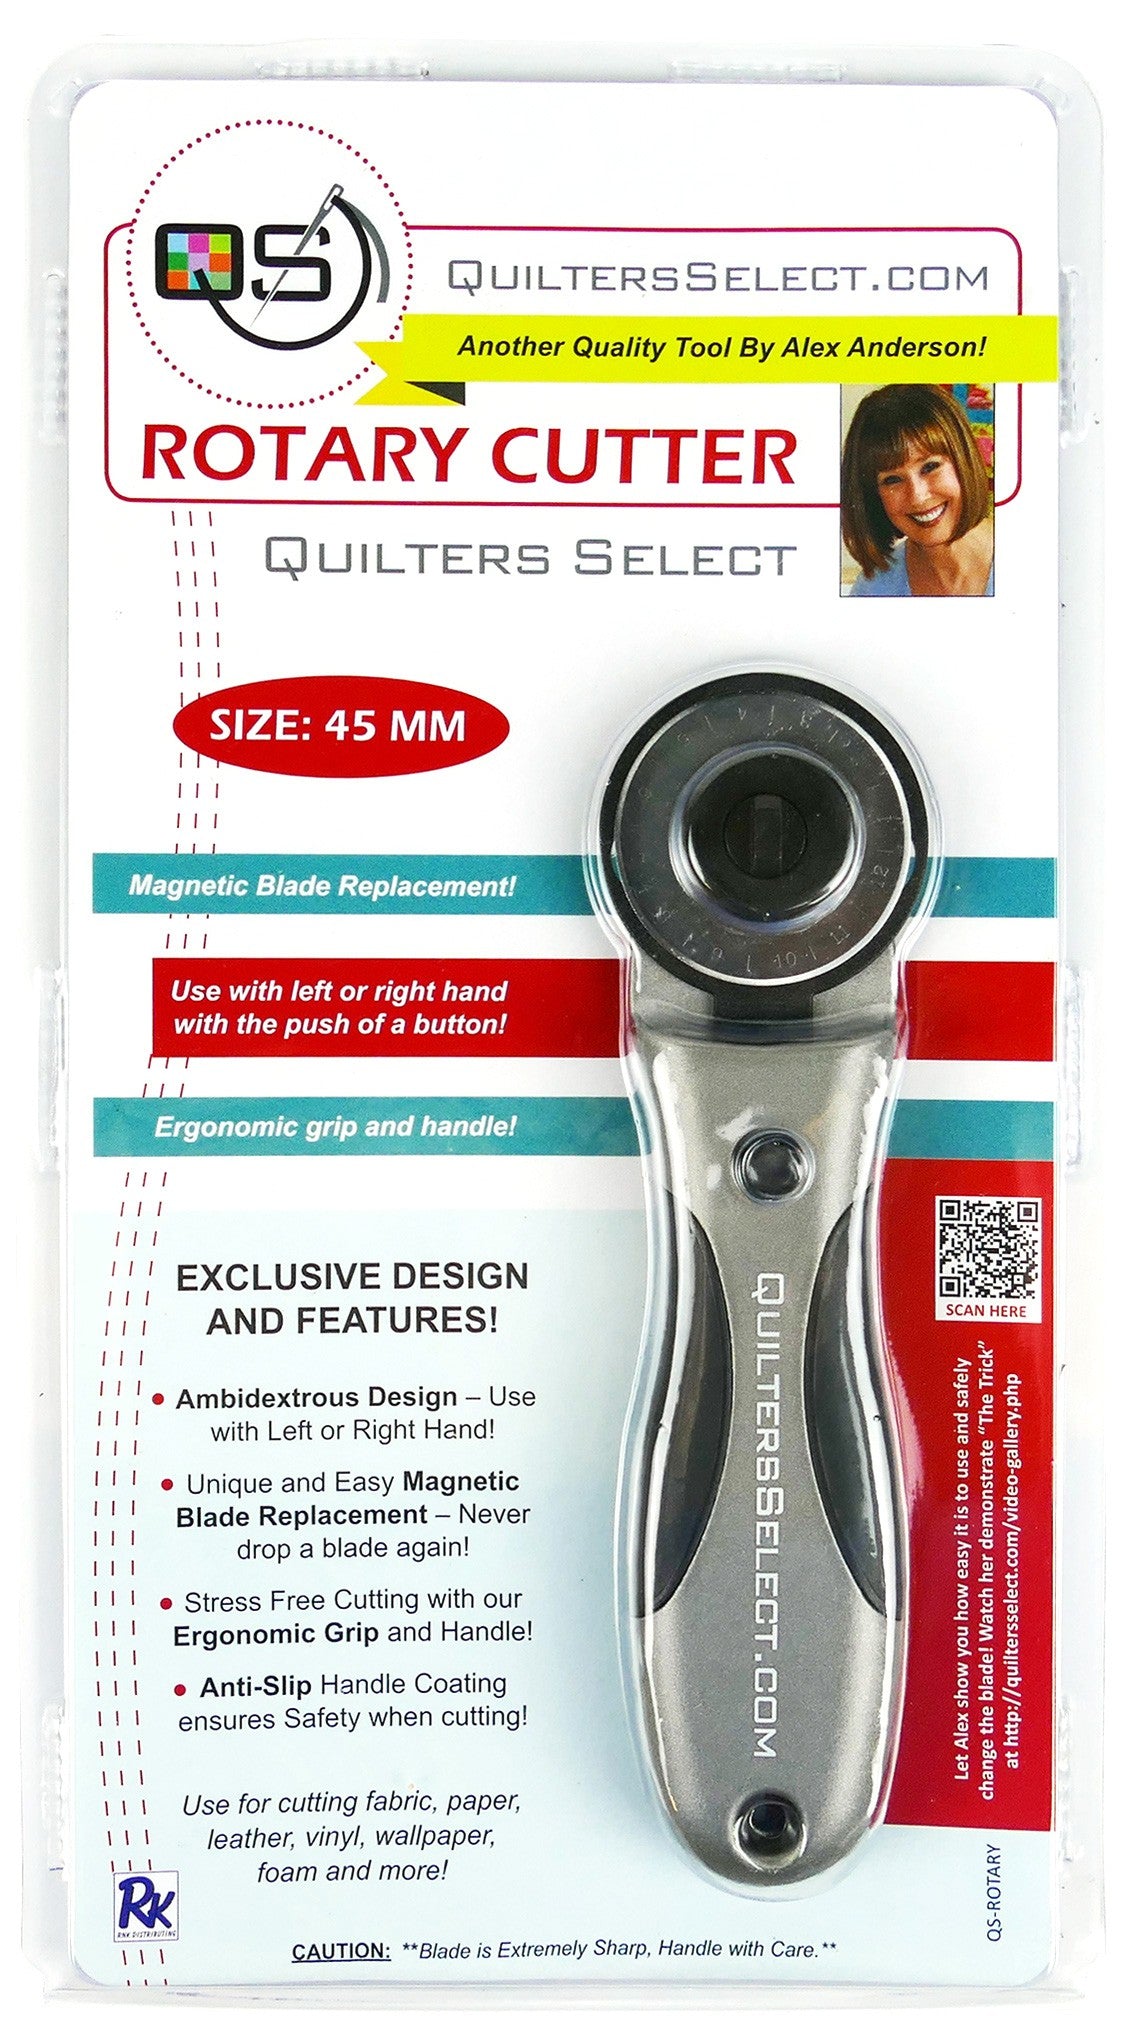 Quilters Select Deluxe Rotary Cutter - Sew Creative Cottage